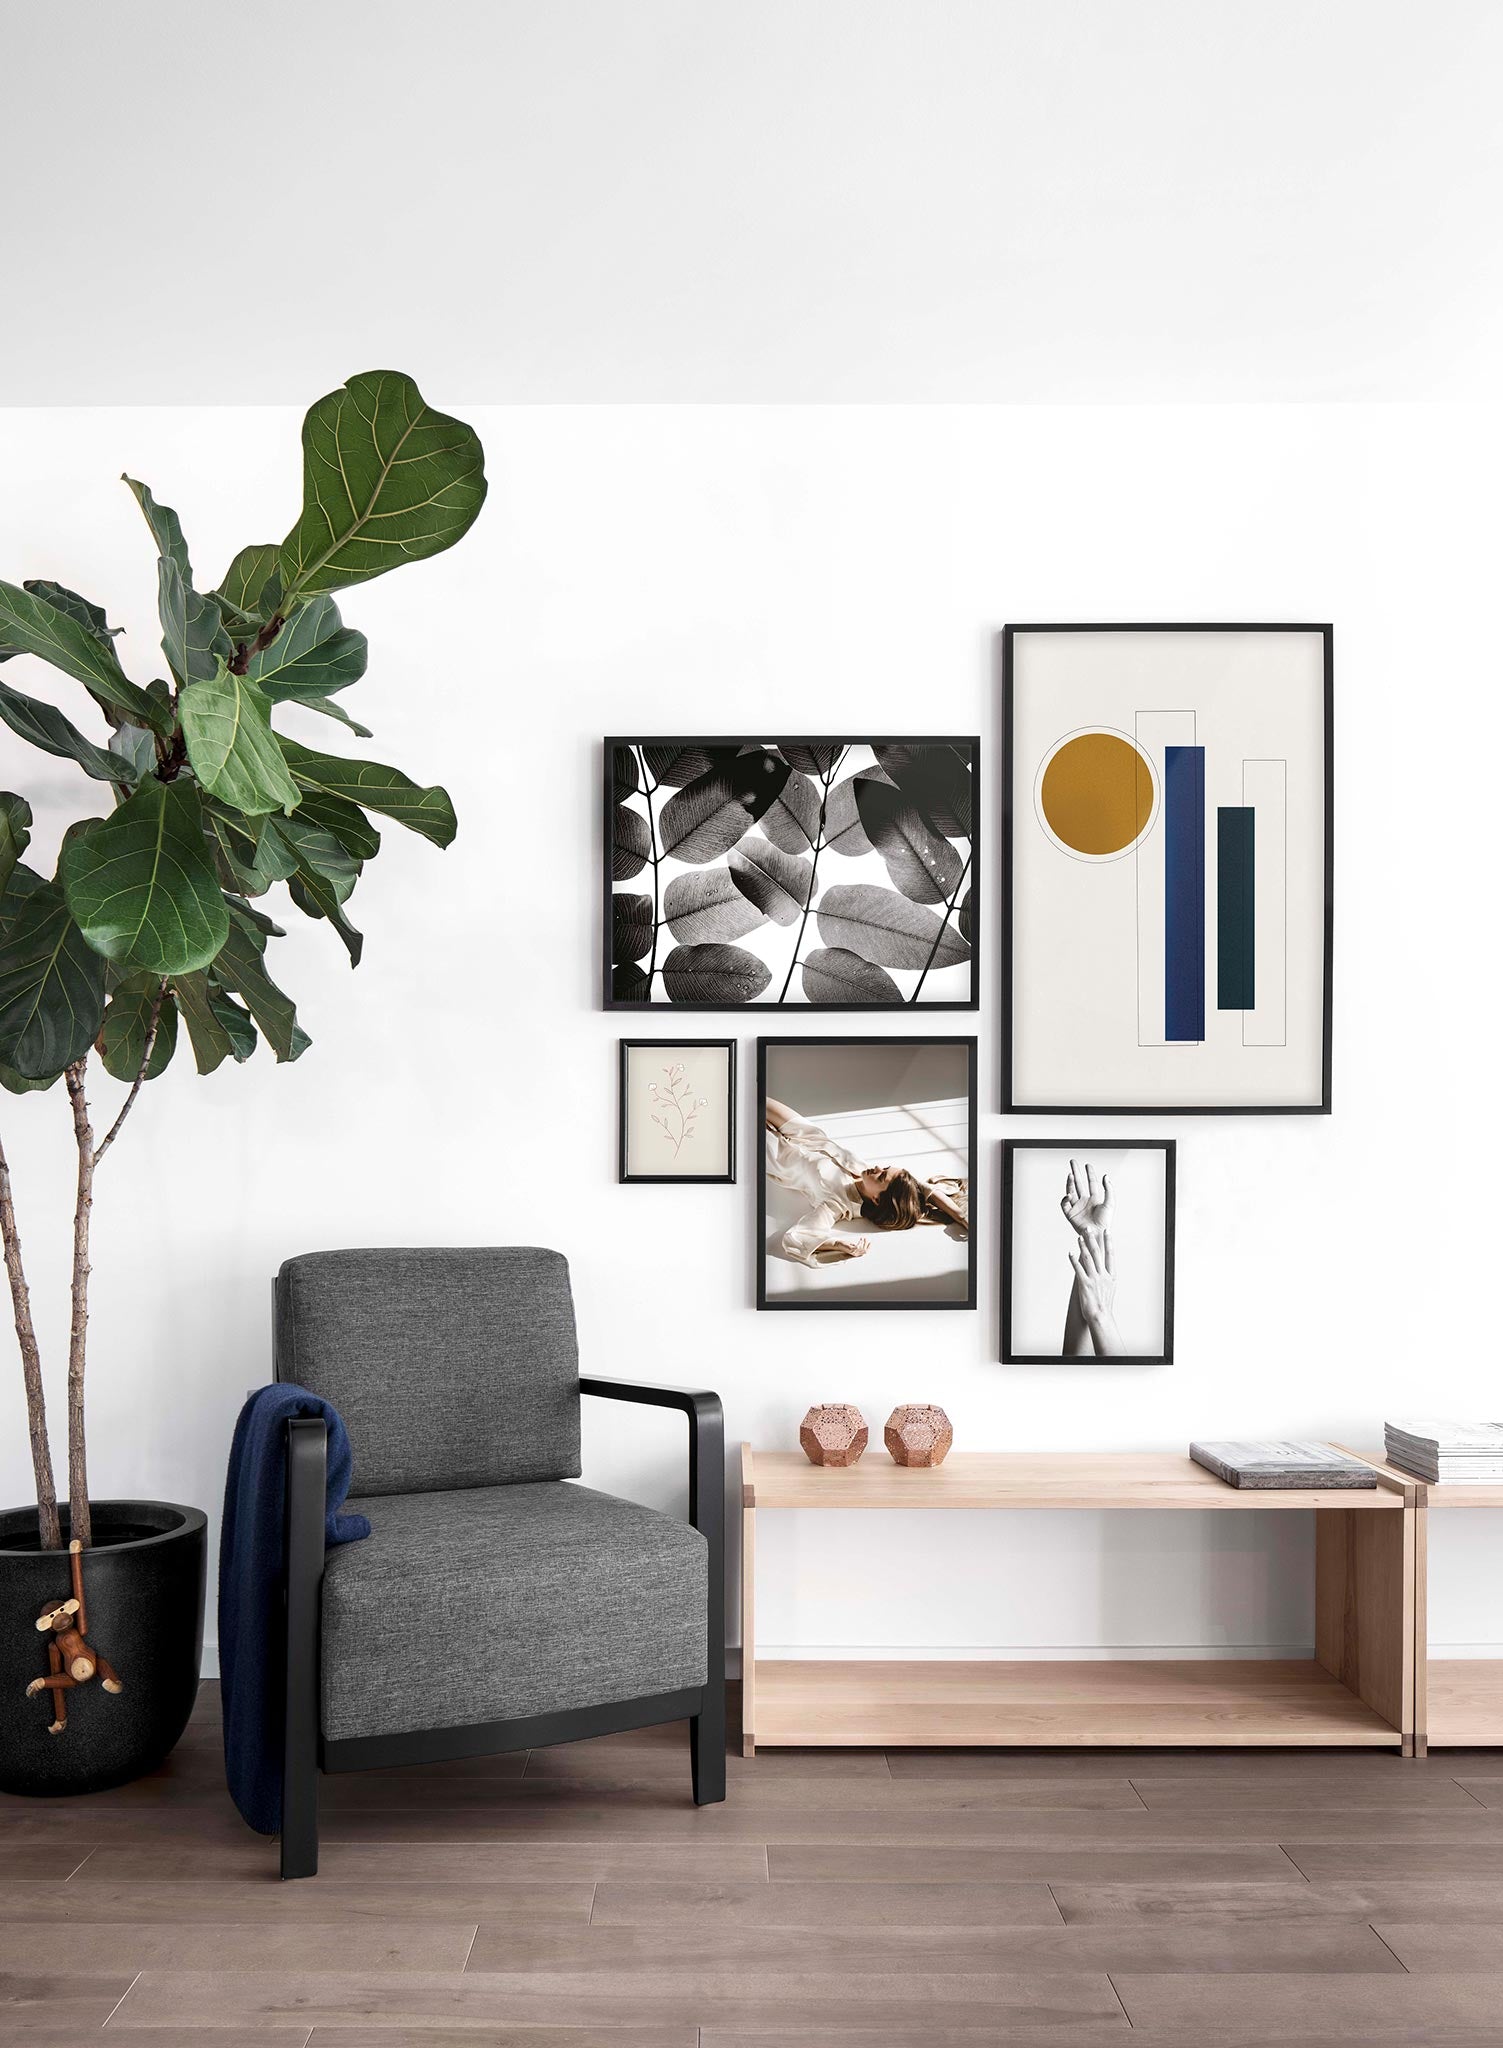 Modern abstract poster by Opposite Wall with mid-century modern geometric shapes by Toffie Affichiste - Lifestyle Gallery - Living Room